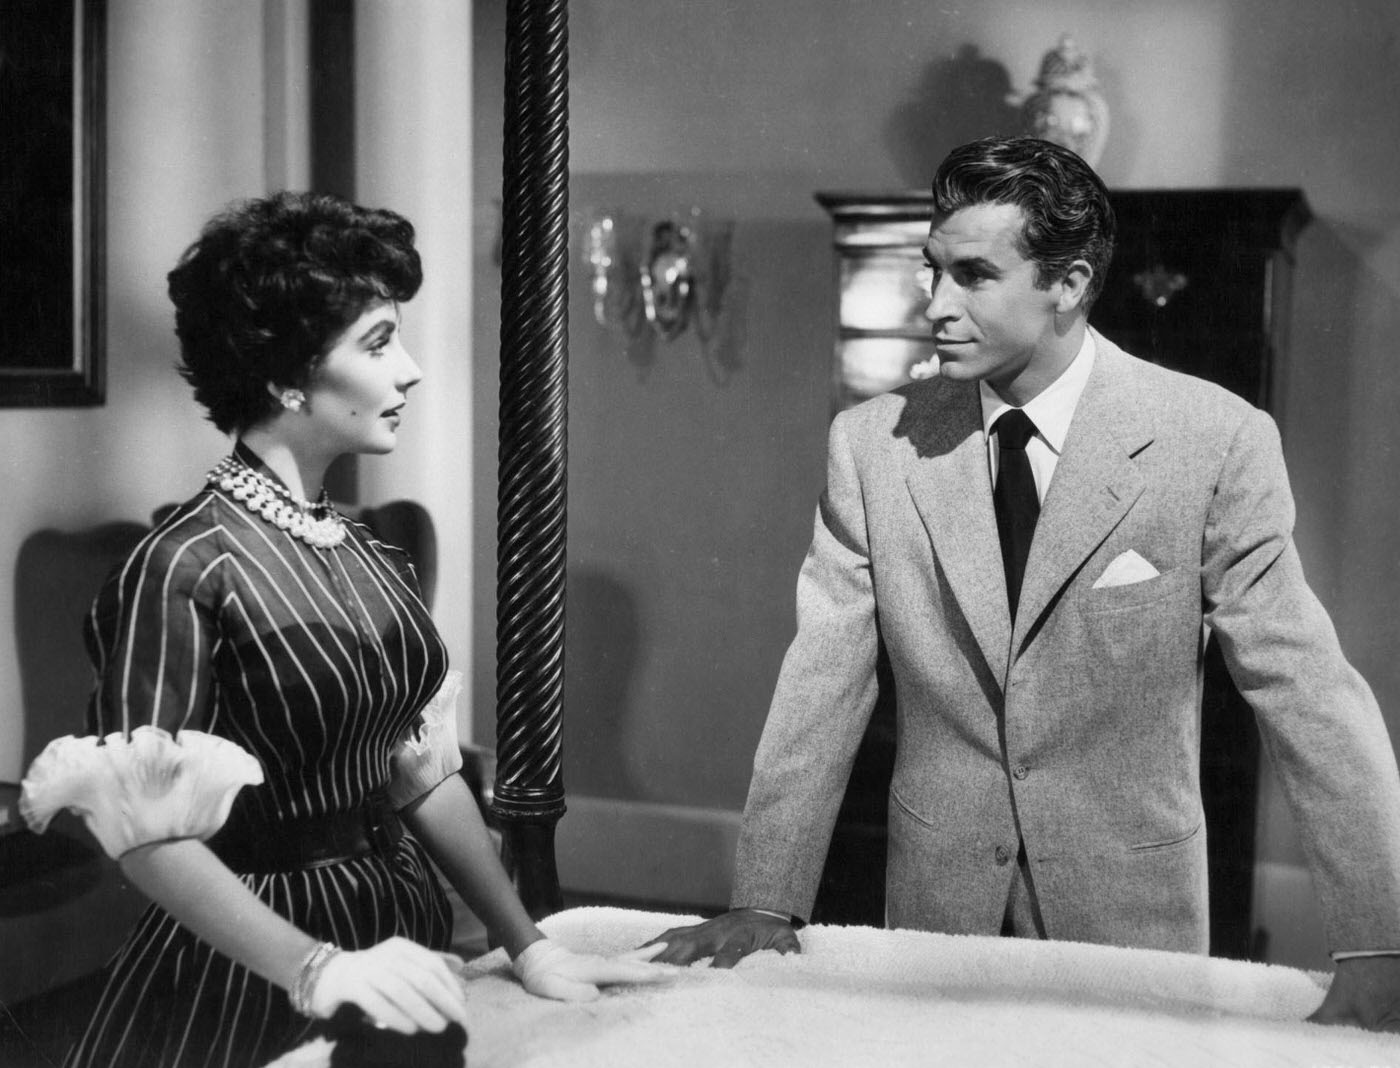 Elizabeth Taylor shows Fernando Lamas around the house he's just purchased in a scene from 'Girl Who Had Everything' (1953).